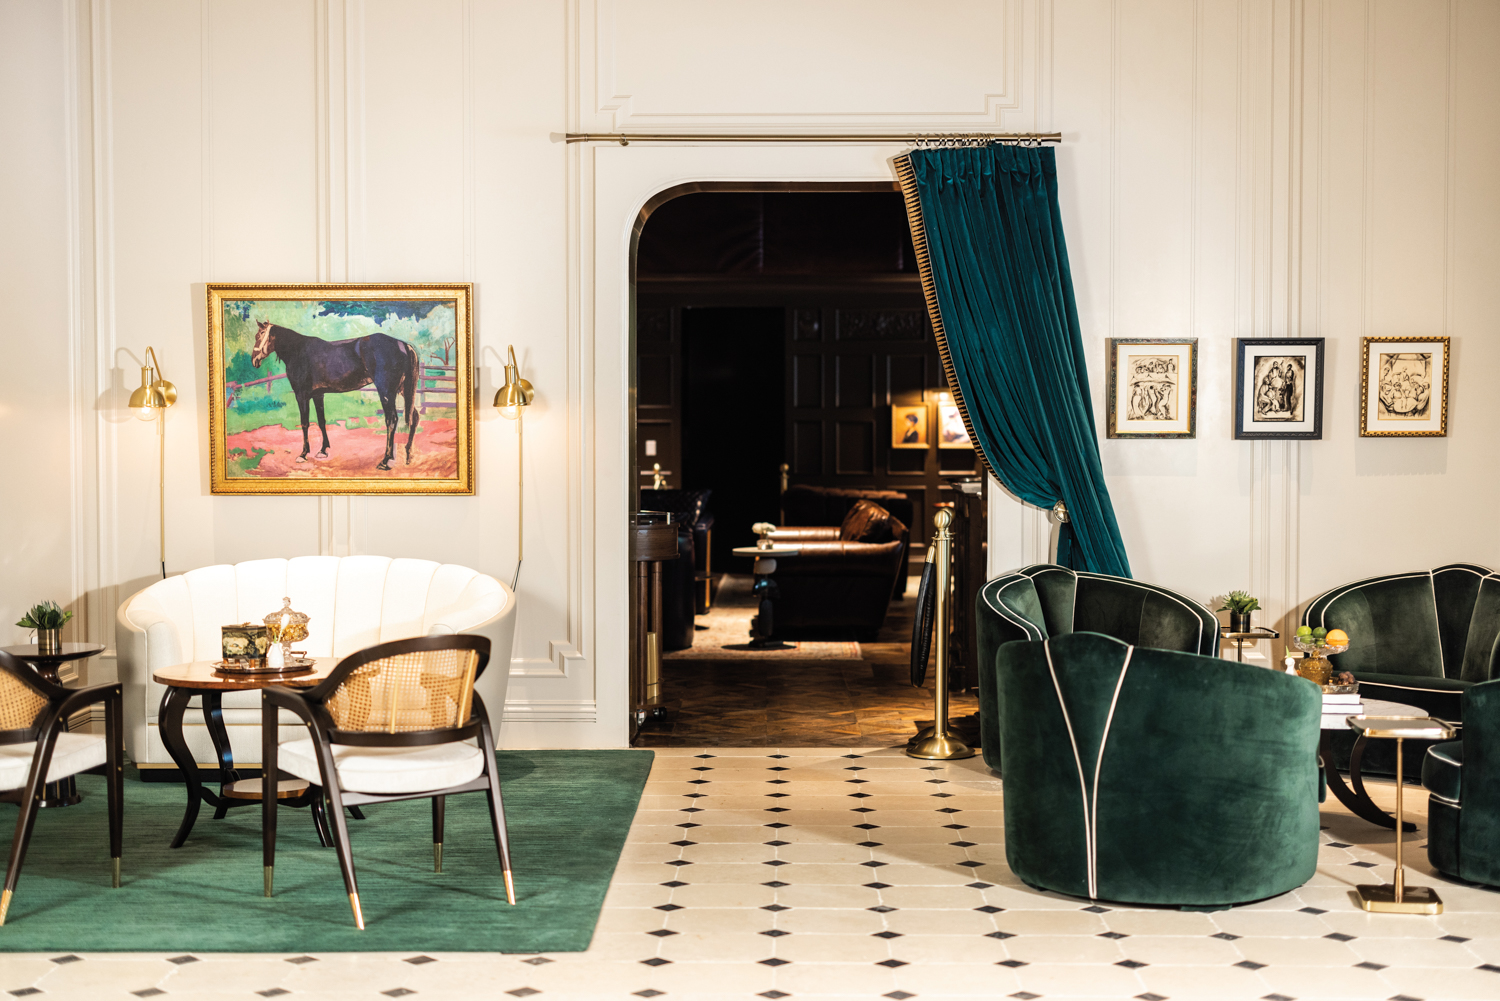 Hôtel Swexan room with plush green armchairs, small side tables and horse portrait